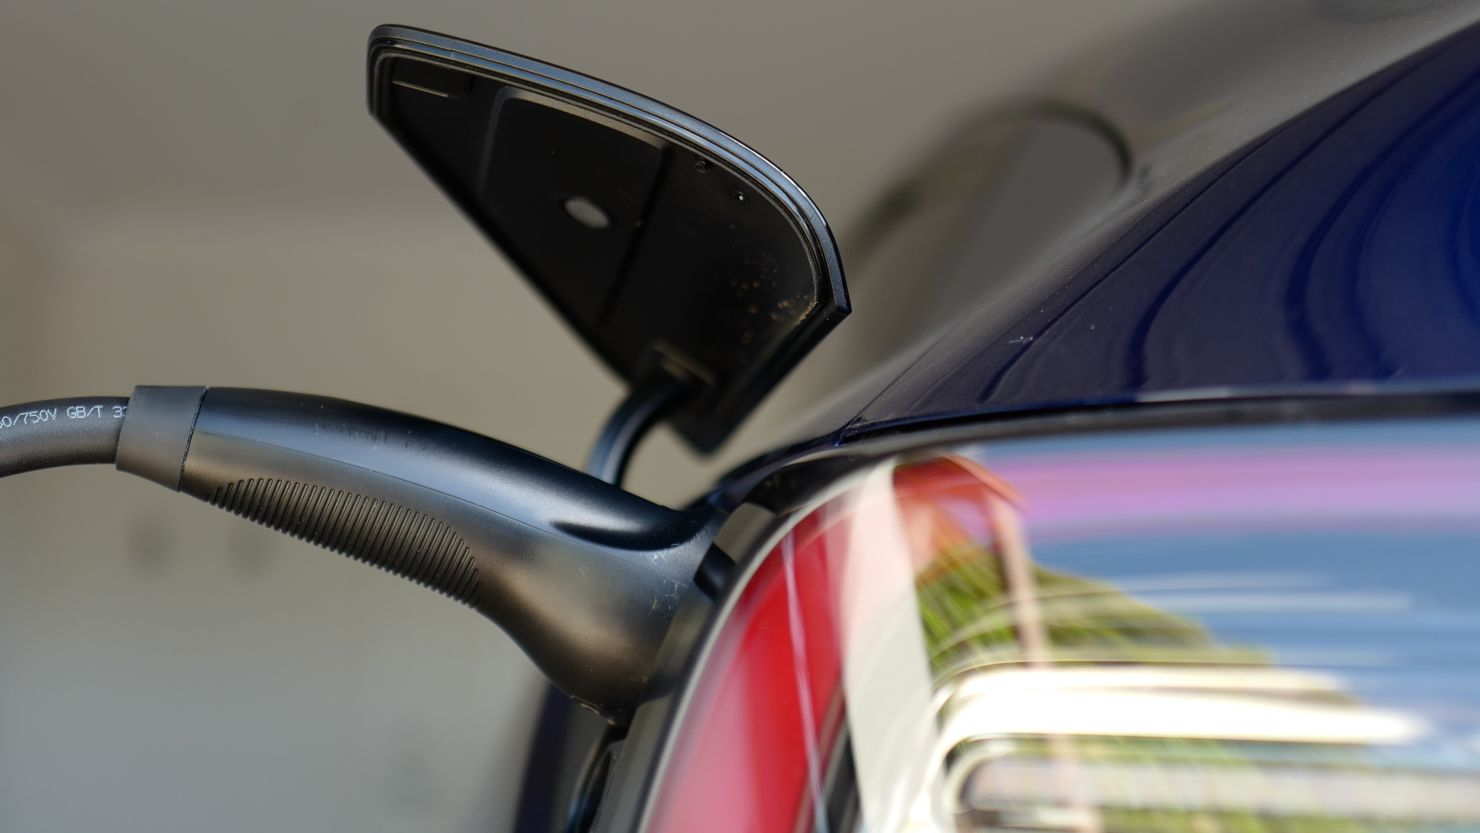 Starting next year, electric car buyers can get their tax credits at the time of purchase.